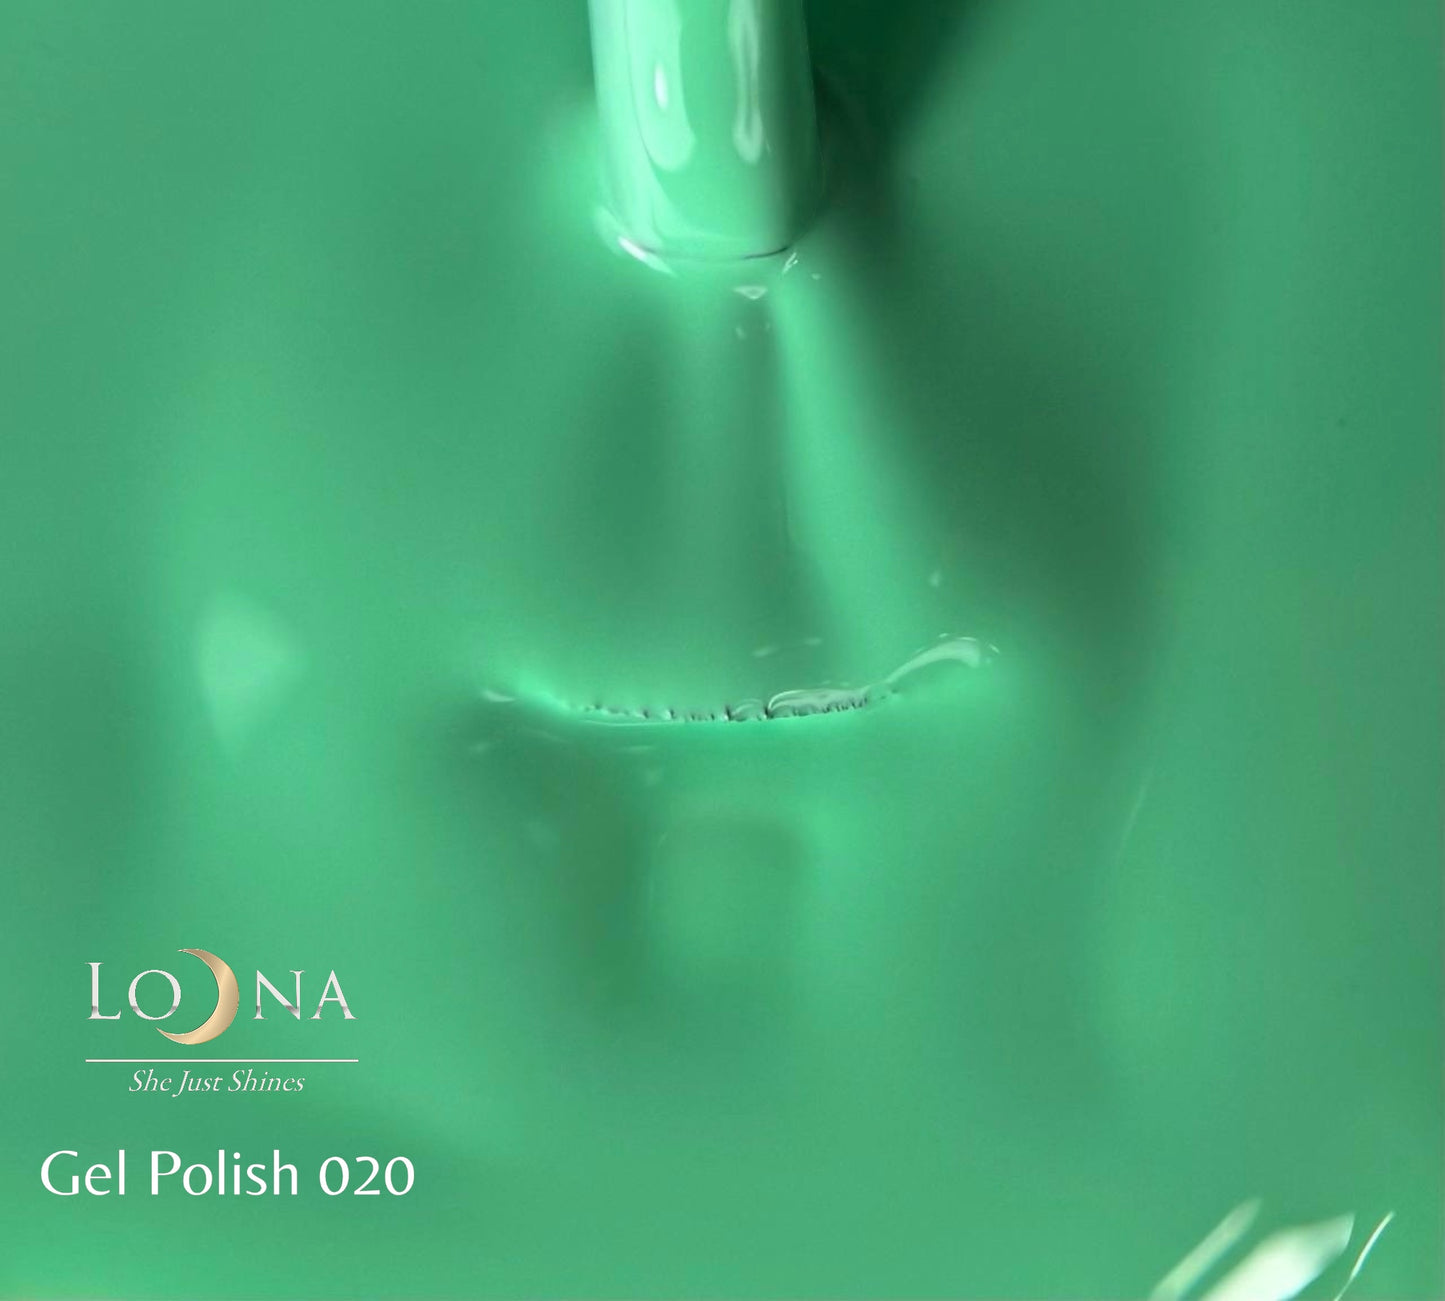 Loona Spring Polish Collection